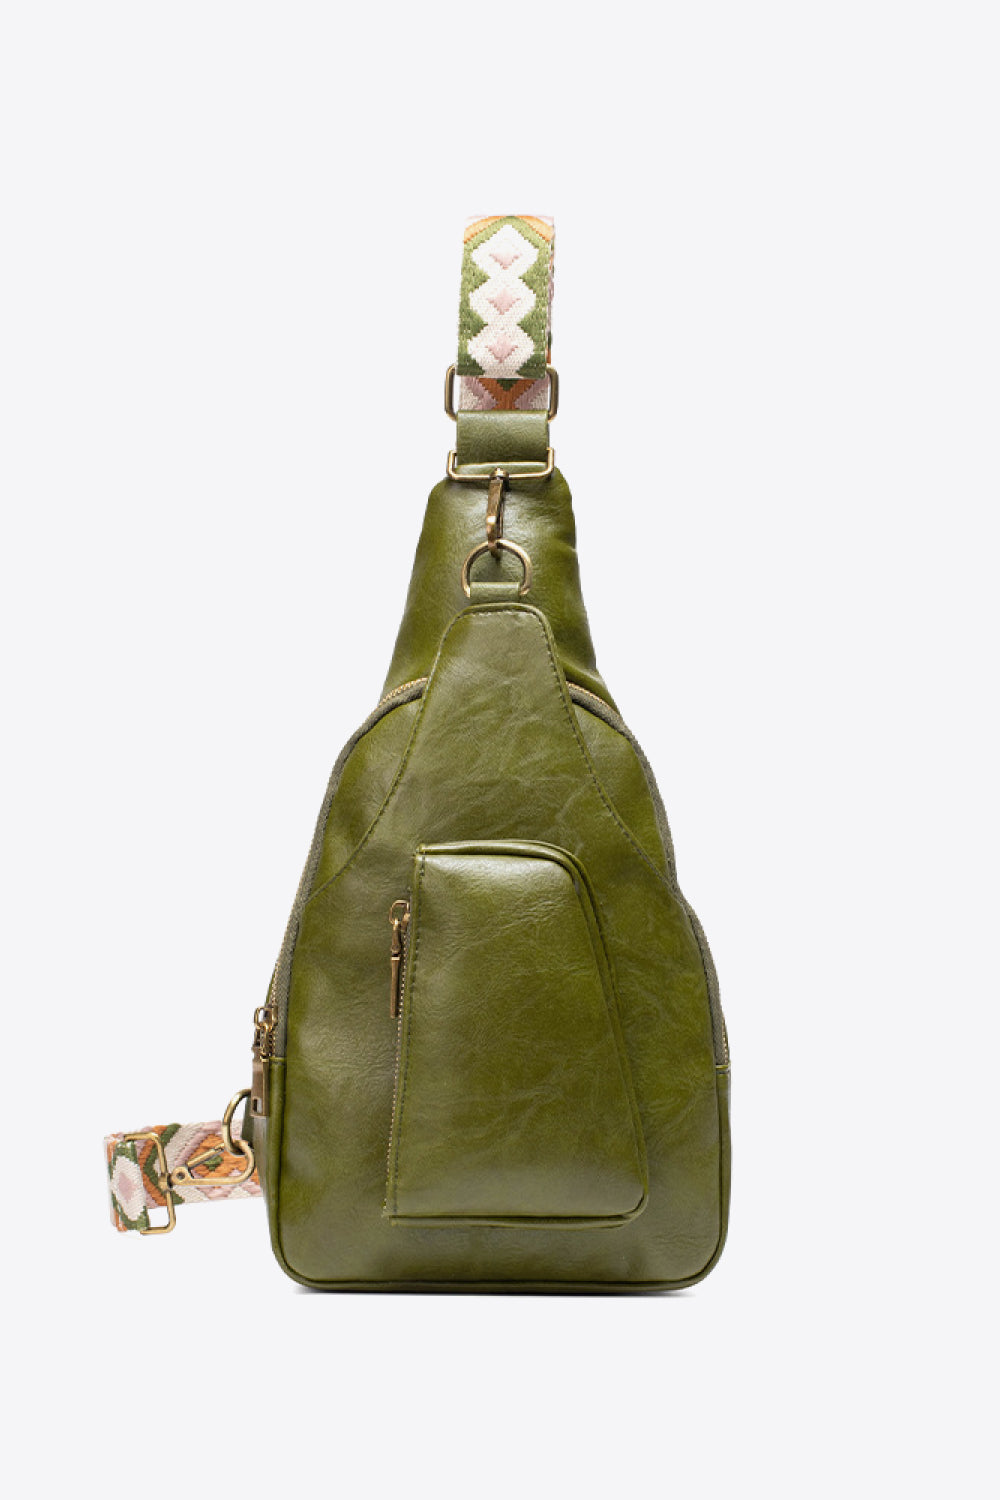 Dark Olive Green All The Feels PU Leather Sling Bag Sentient Beauty Fashions bags & totes